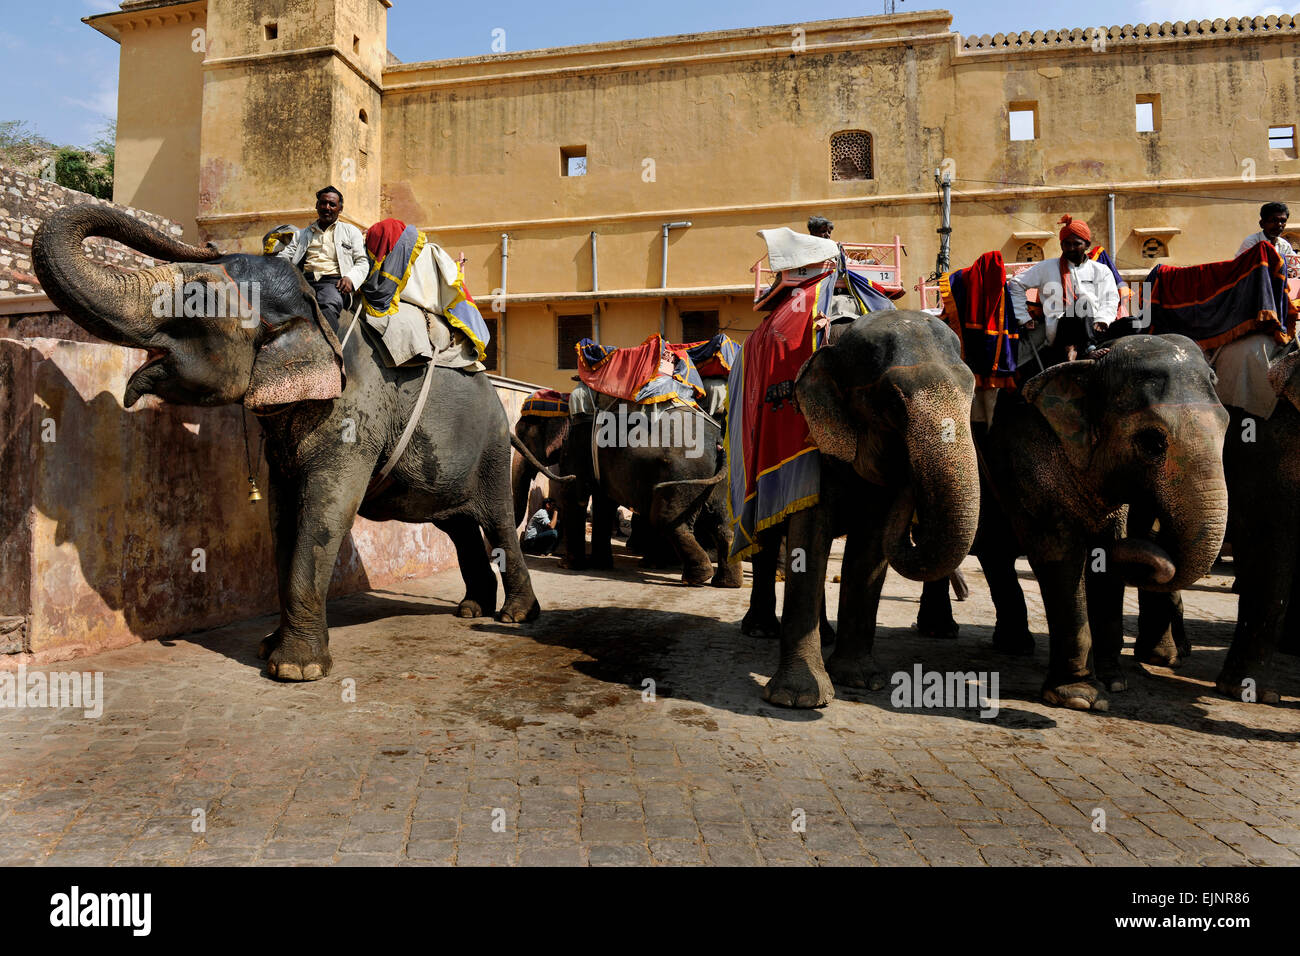 Elephant ride to the Amber Amer Fort Palace Jaipur Rajasthan Stock Photo